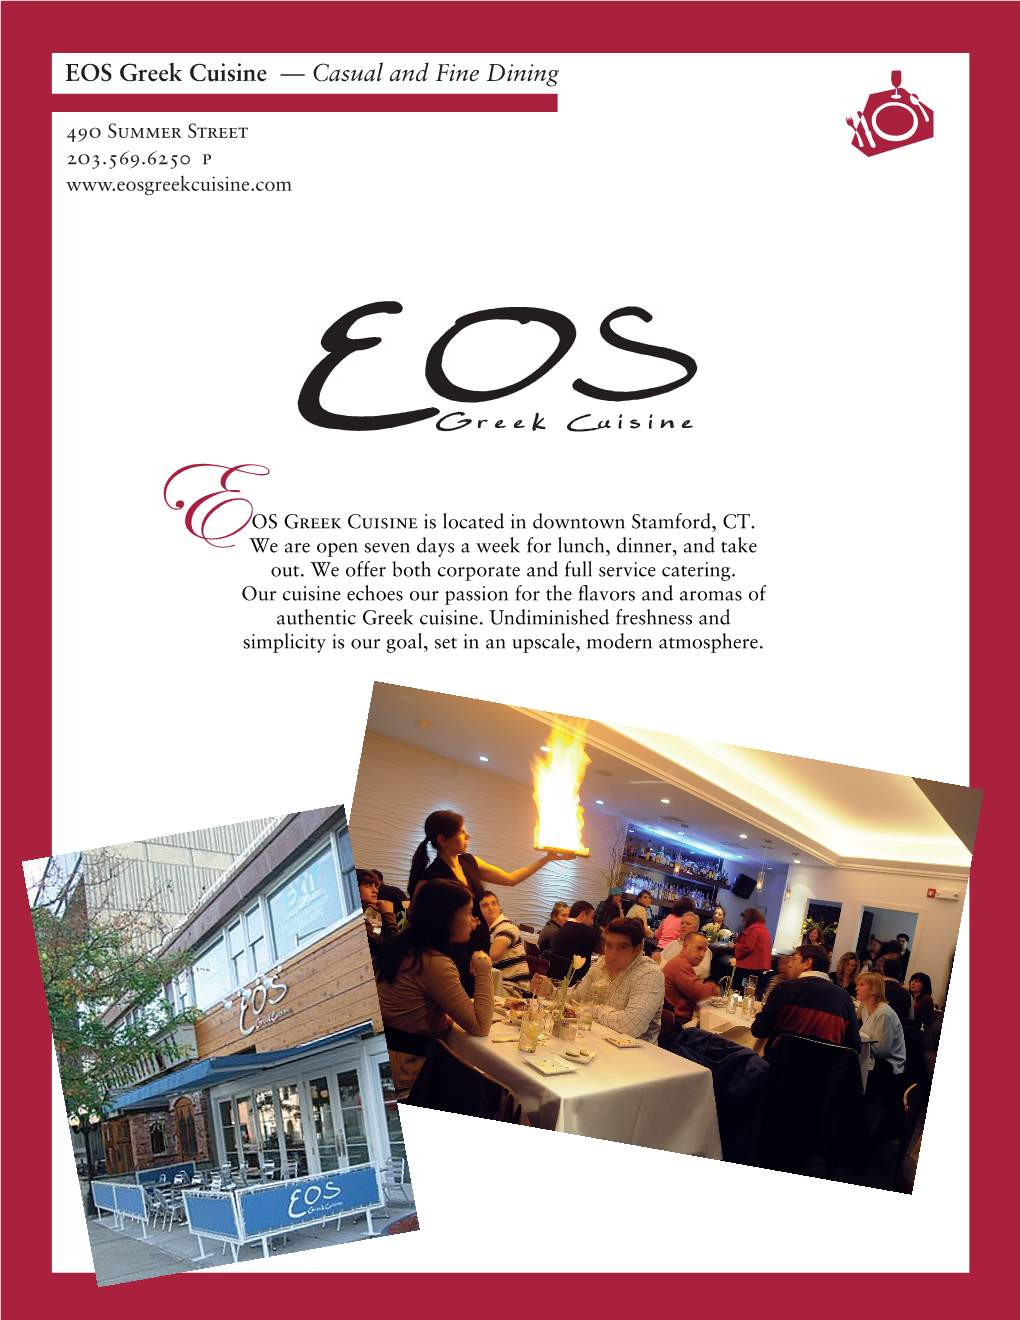 EOS Greek Cuisine — Casual and Fine Dining